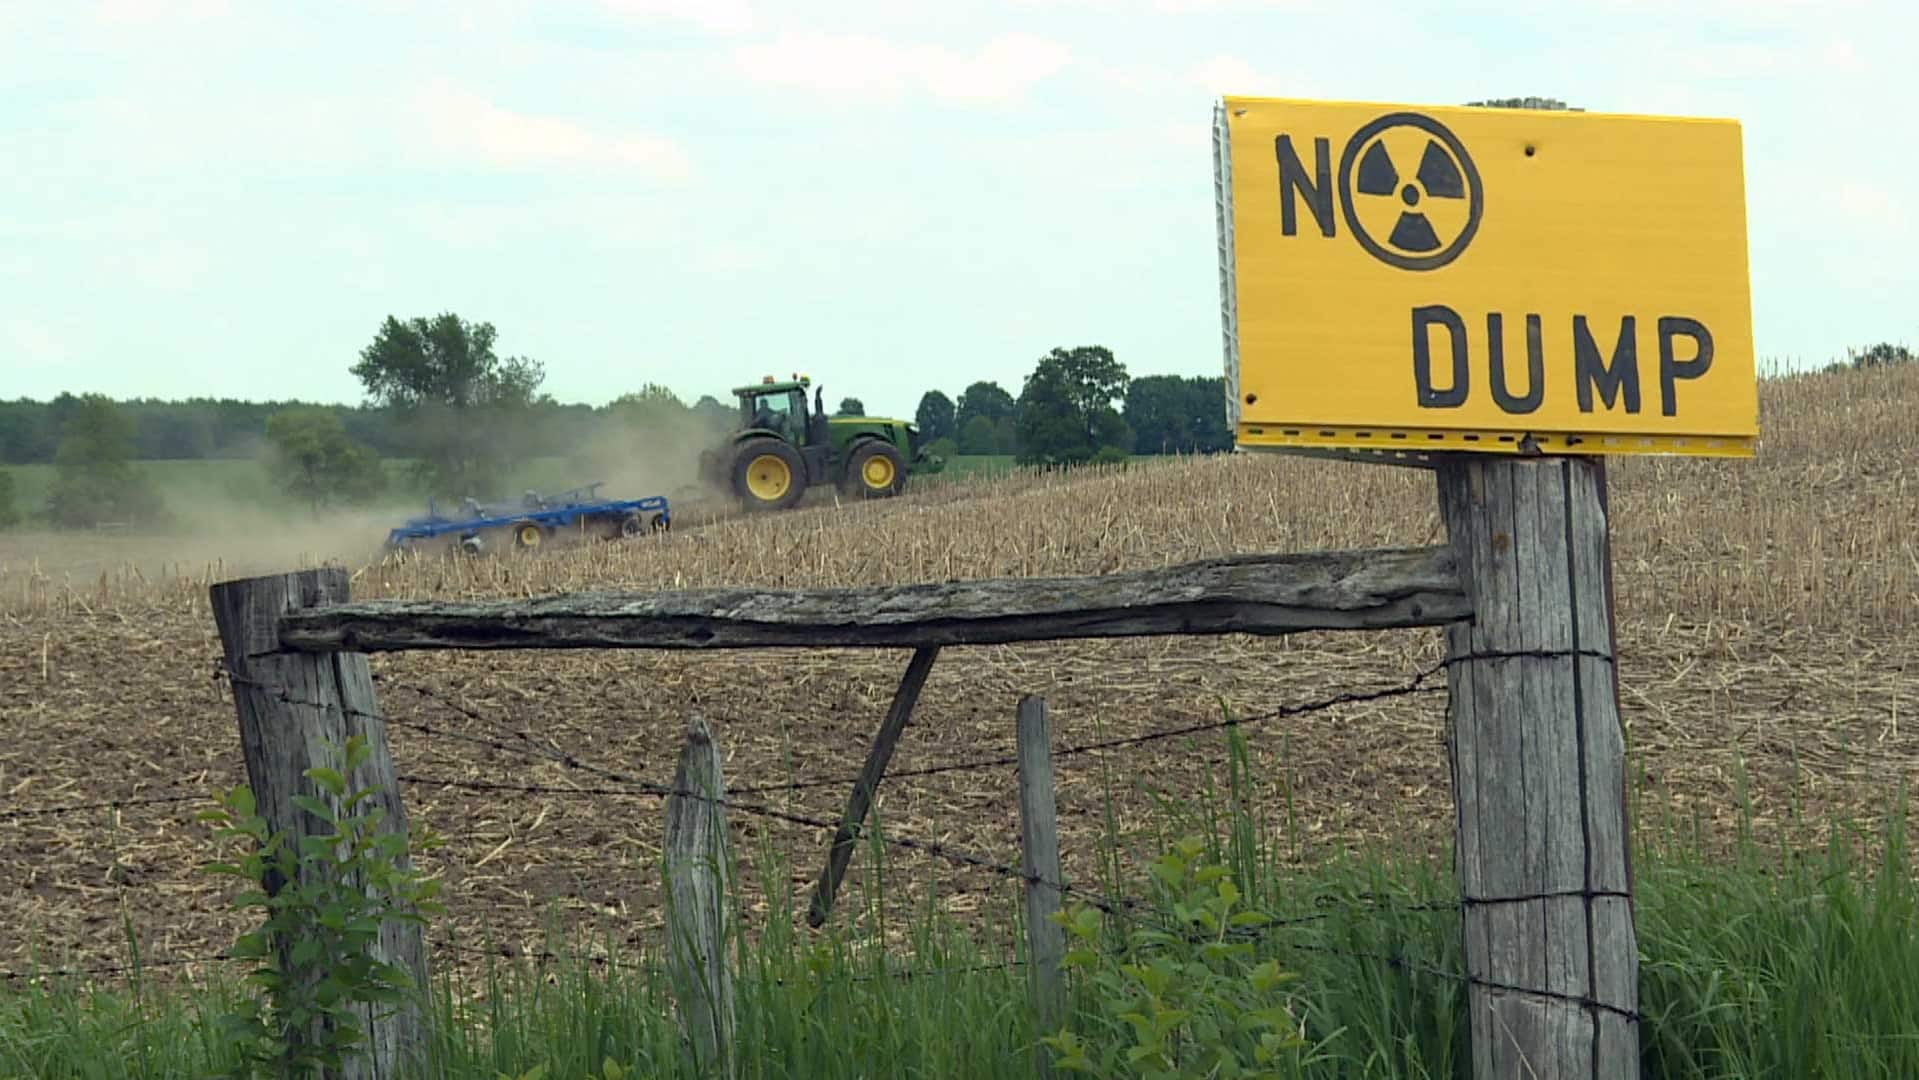 30,000 shipments of nuclear waste would move through Ontario cities, farmland under draft plan